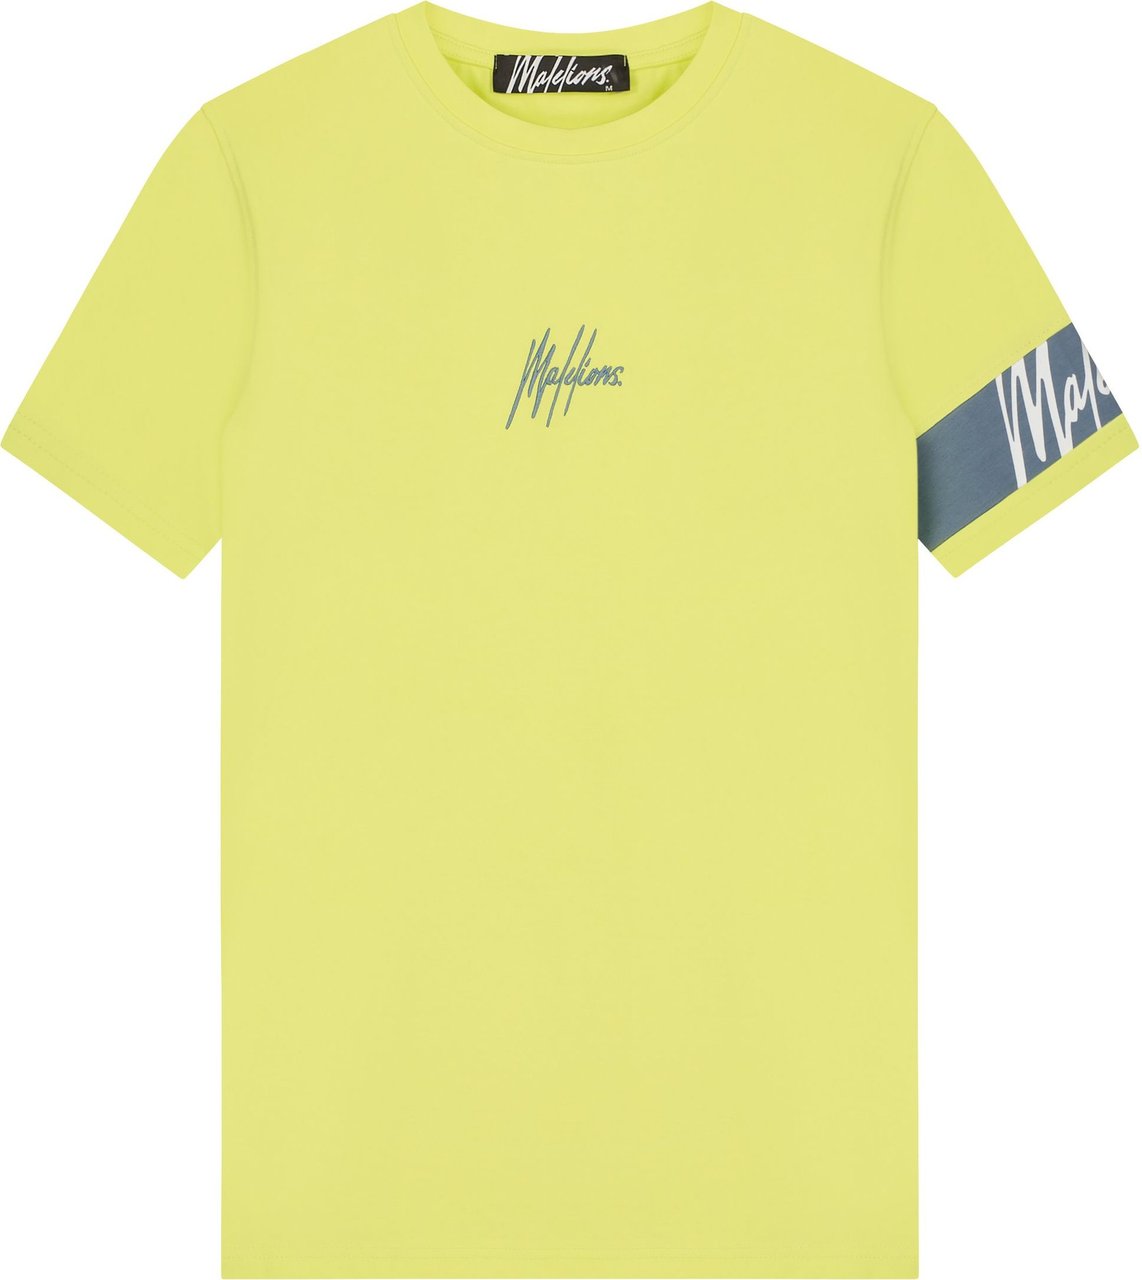 Malelions Captain T-Shirt - Lime Geel